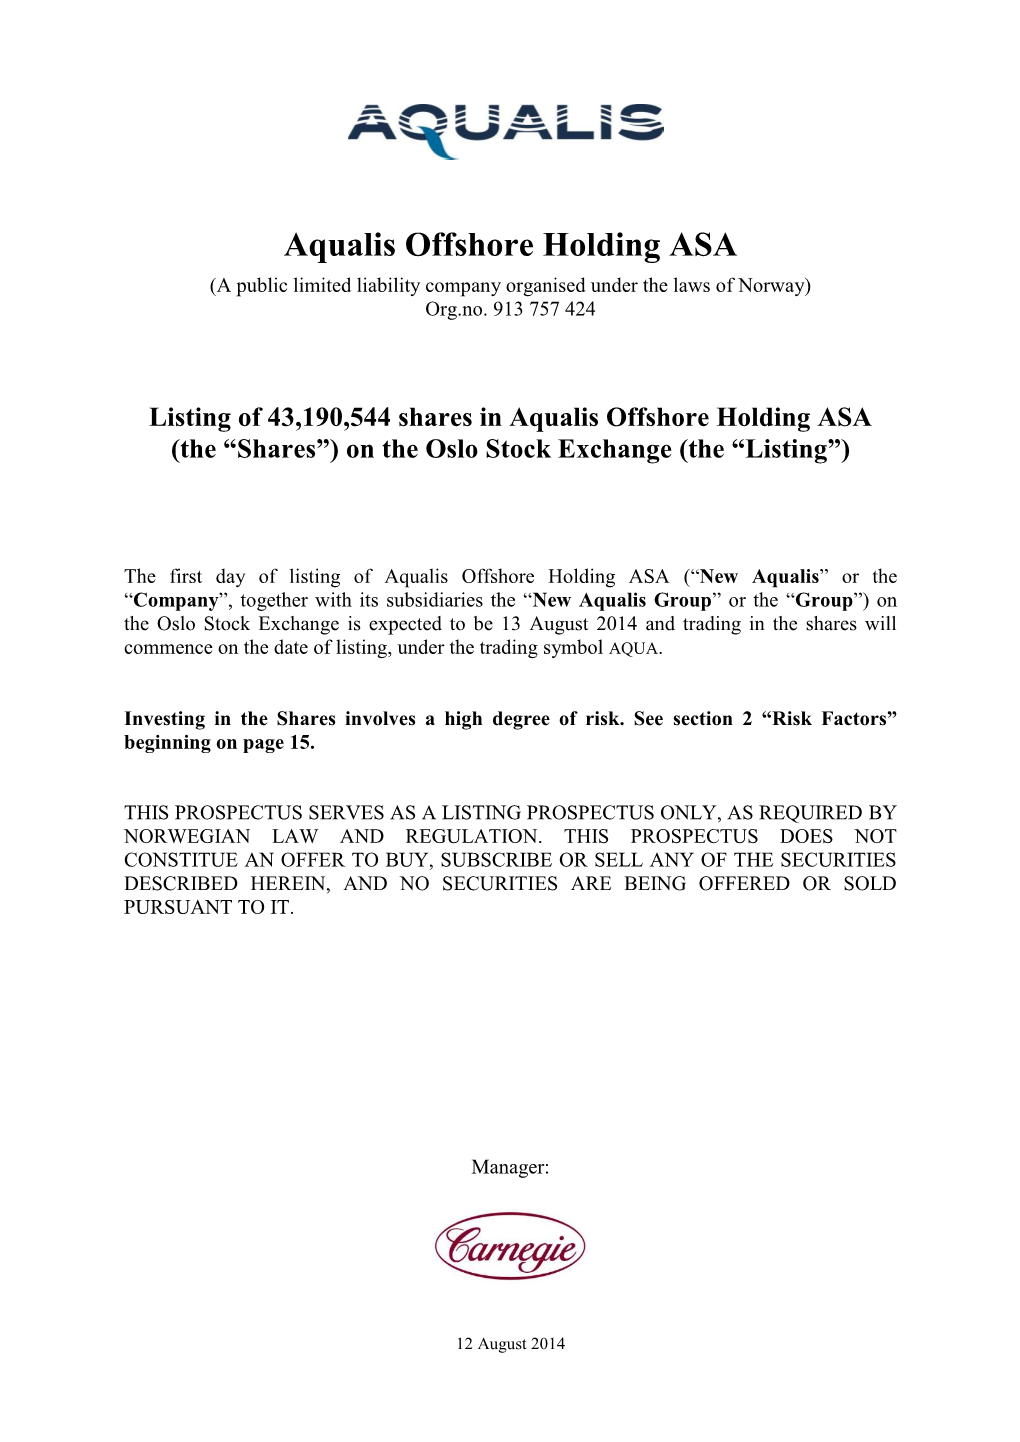 Aqualis Offshore Holding ASA (A Public Limited Liability Company Organised Under the Laws of Norway) Org.No